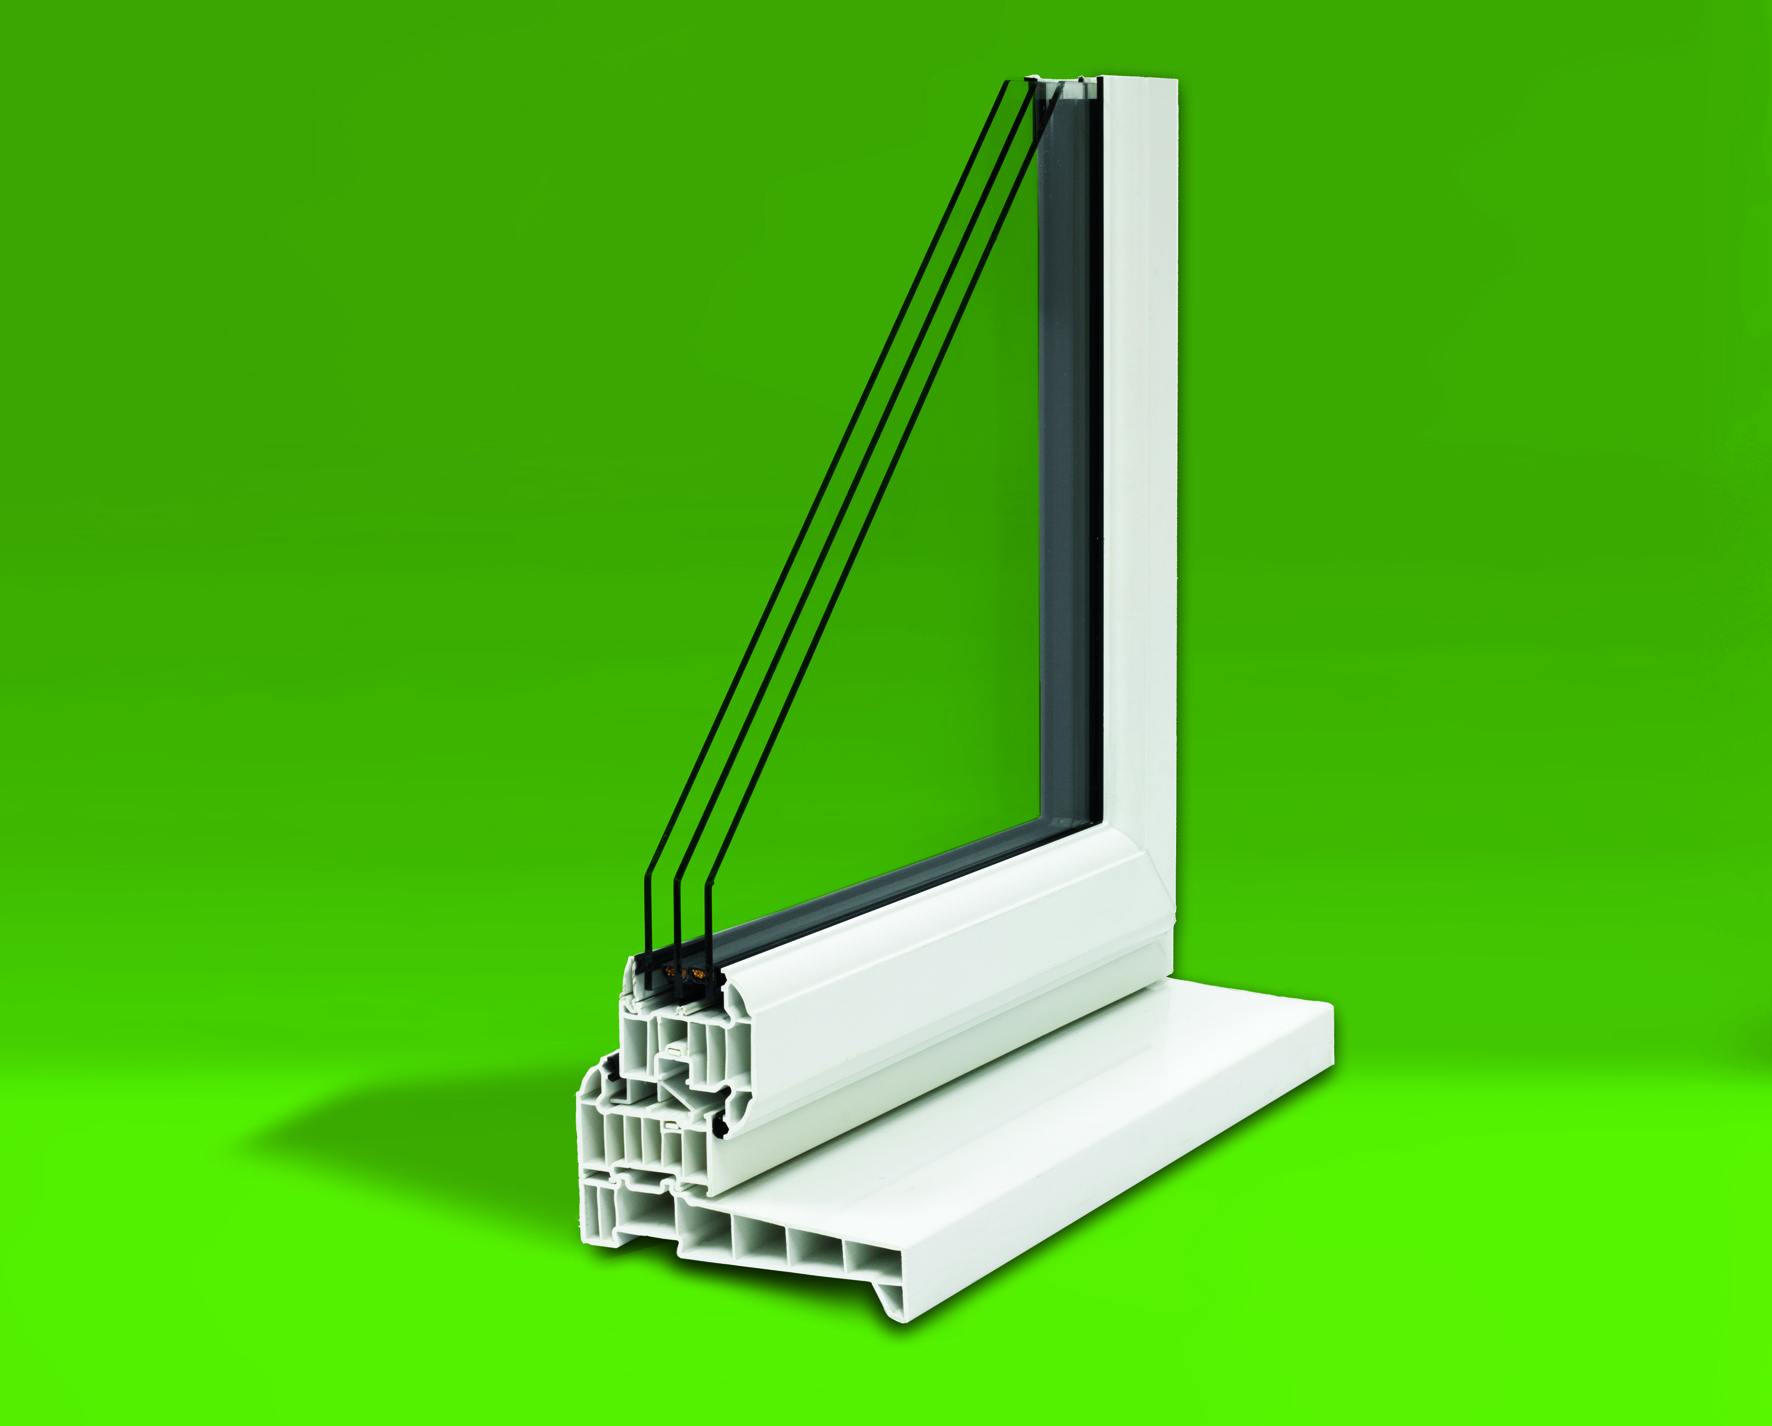 FIND OUT MORE ABOUT TRIPLE GLAZING